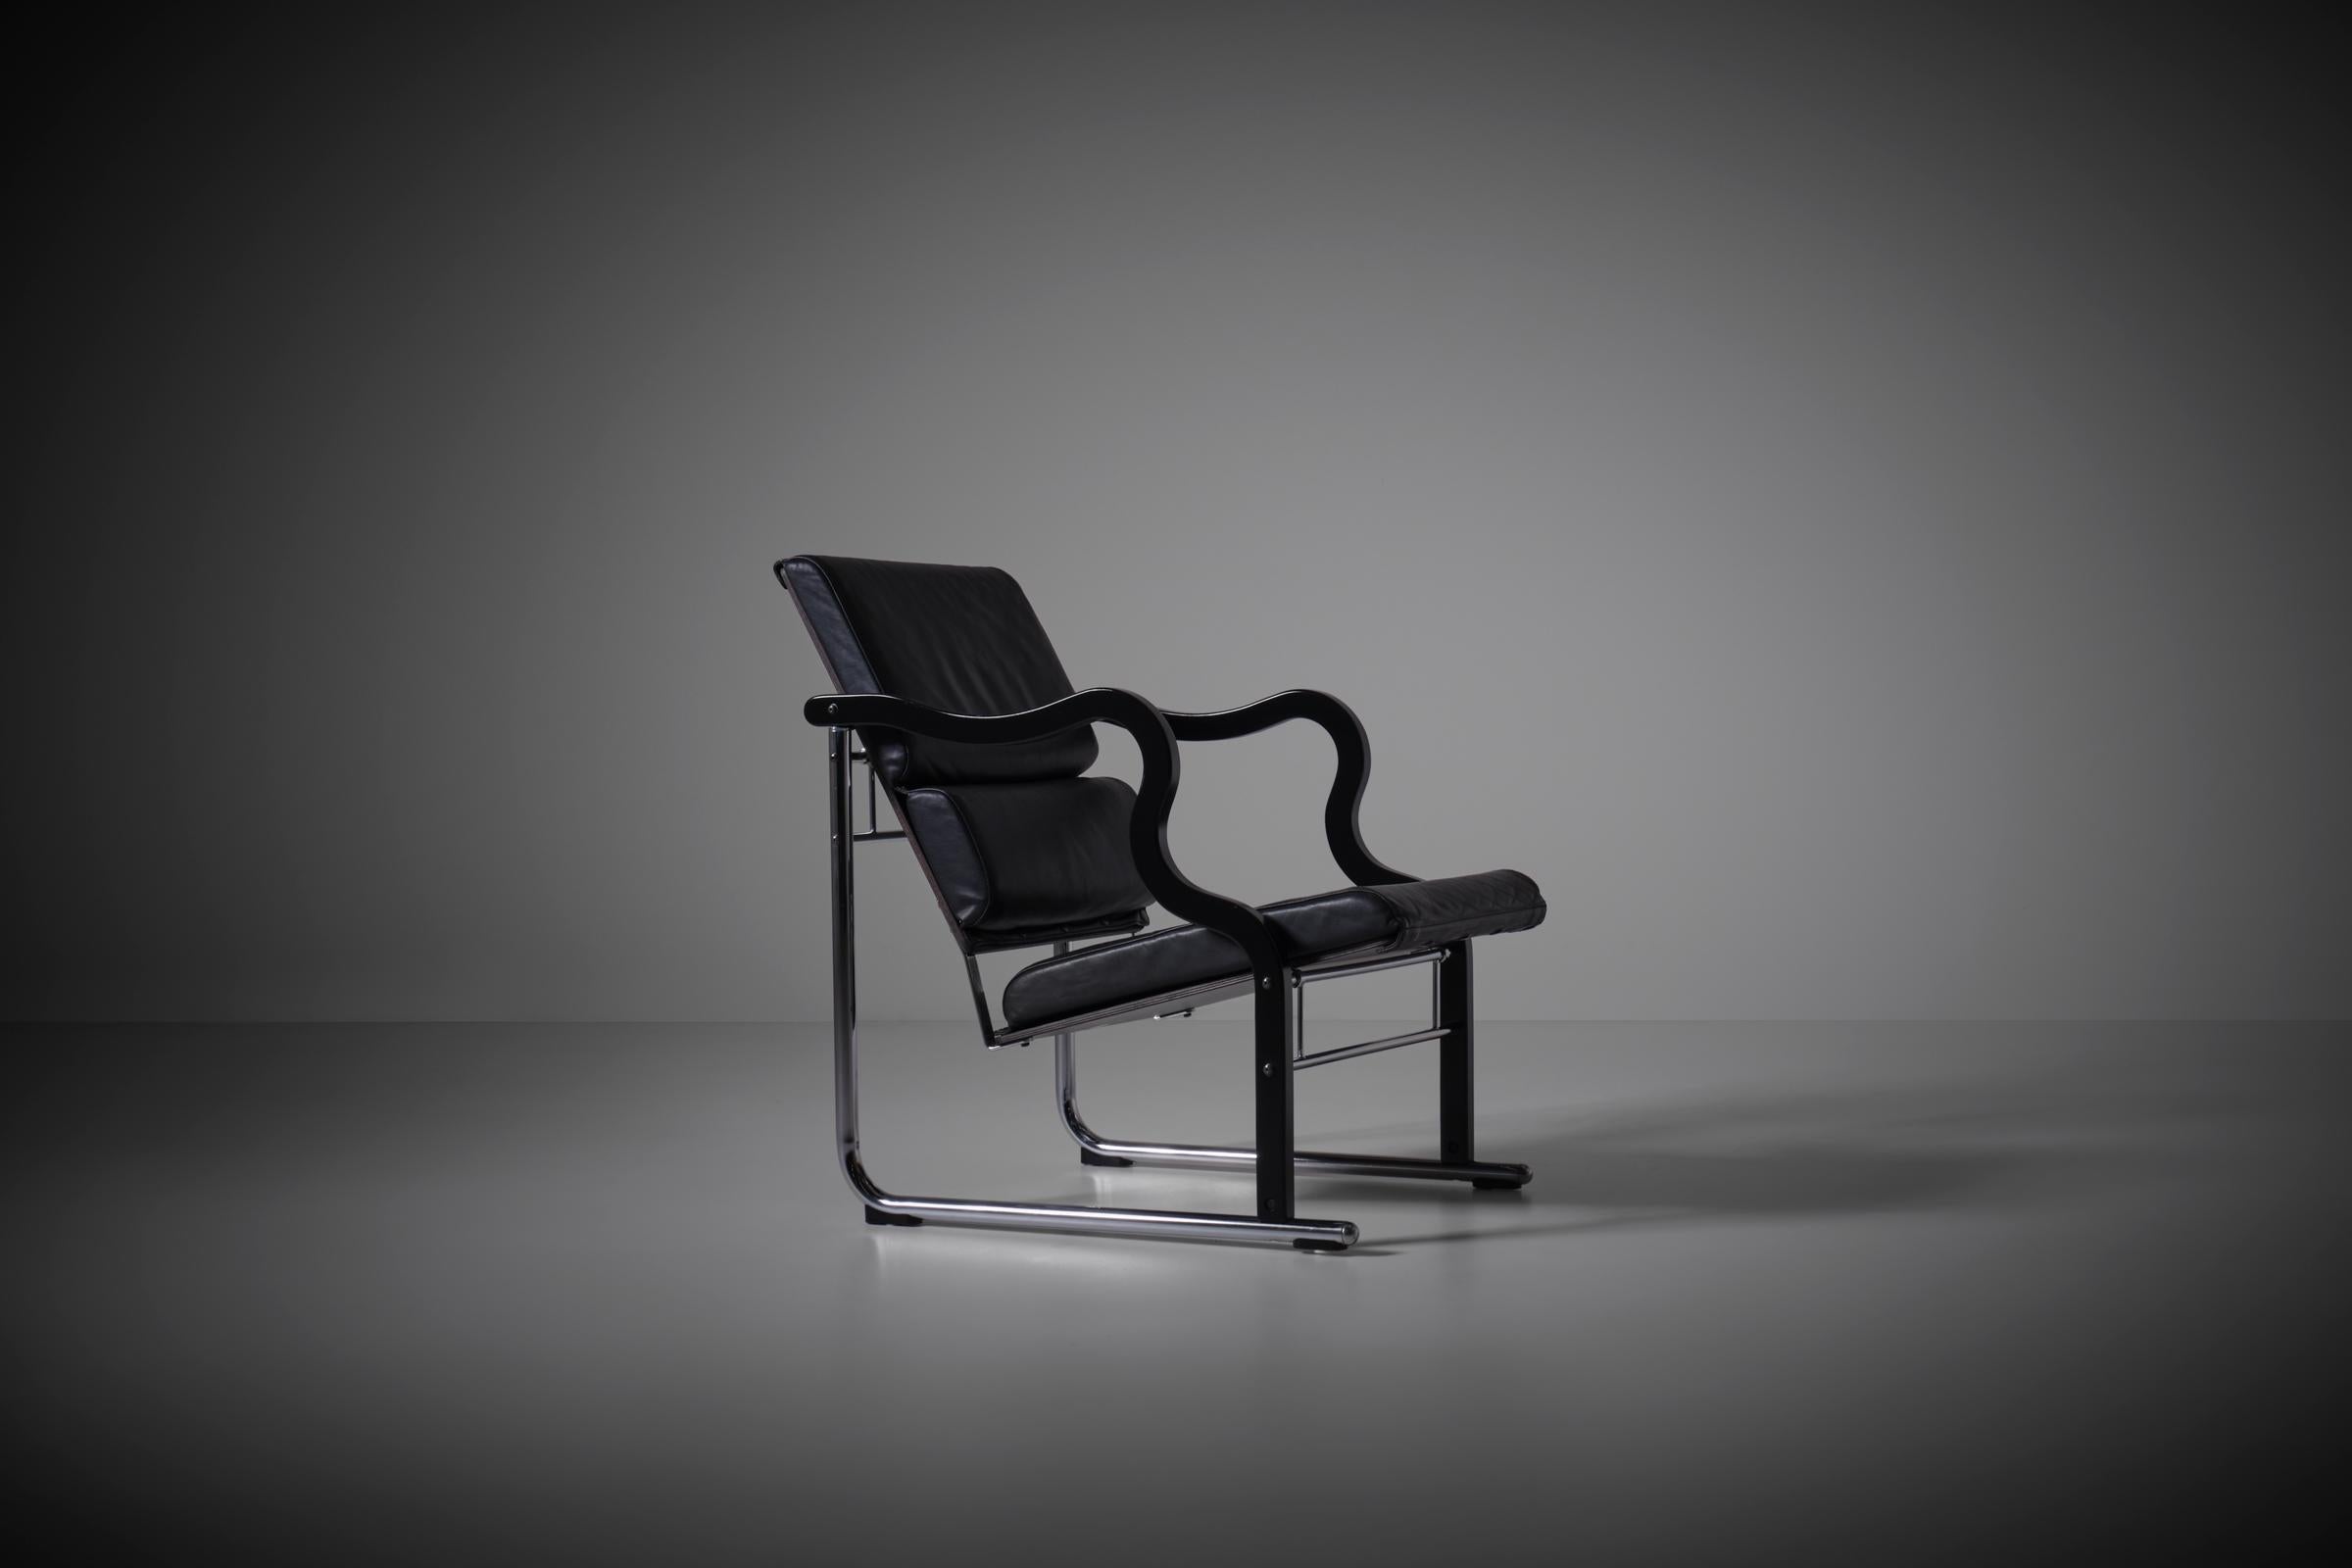 Yrjö Kukkapuro easy chair from the 'Experiment series' for Avarte, Finland 1982. Experimental outspoken design hence the name 'experimental series', experimental yet restrained with the feeling of a prototype; chromed tubular frame with black